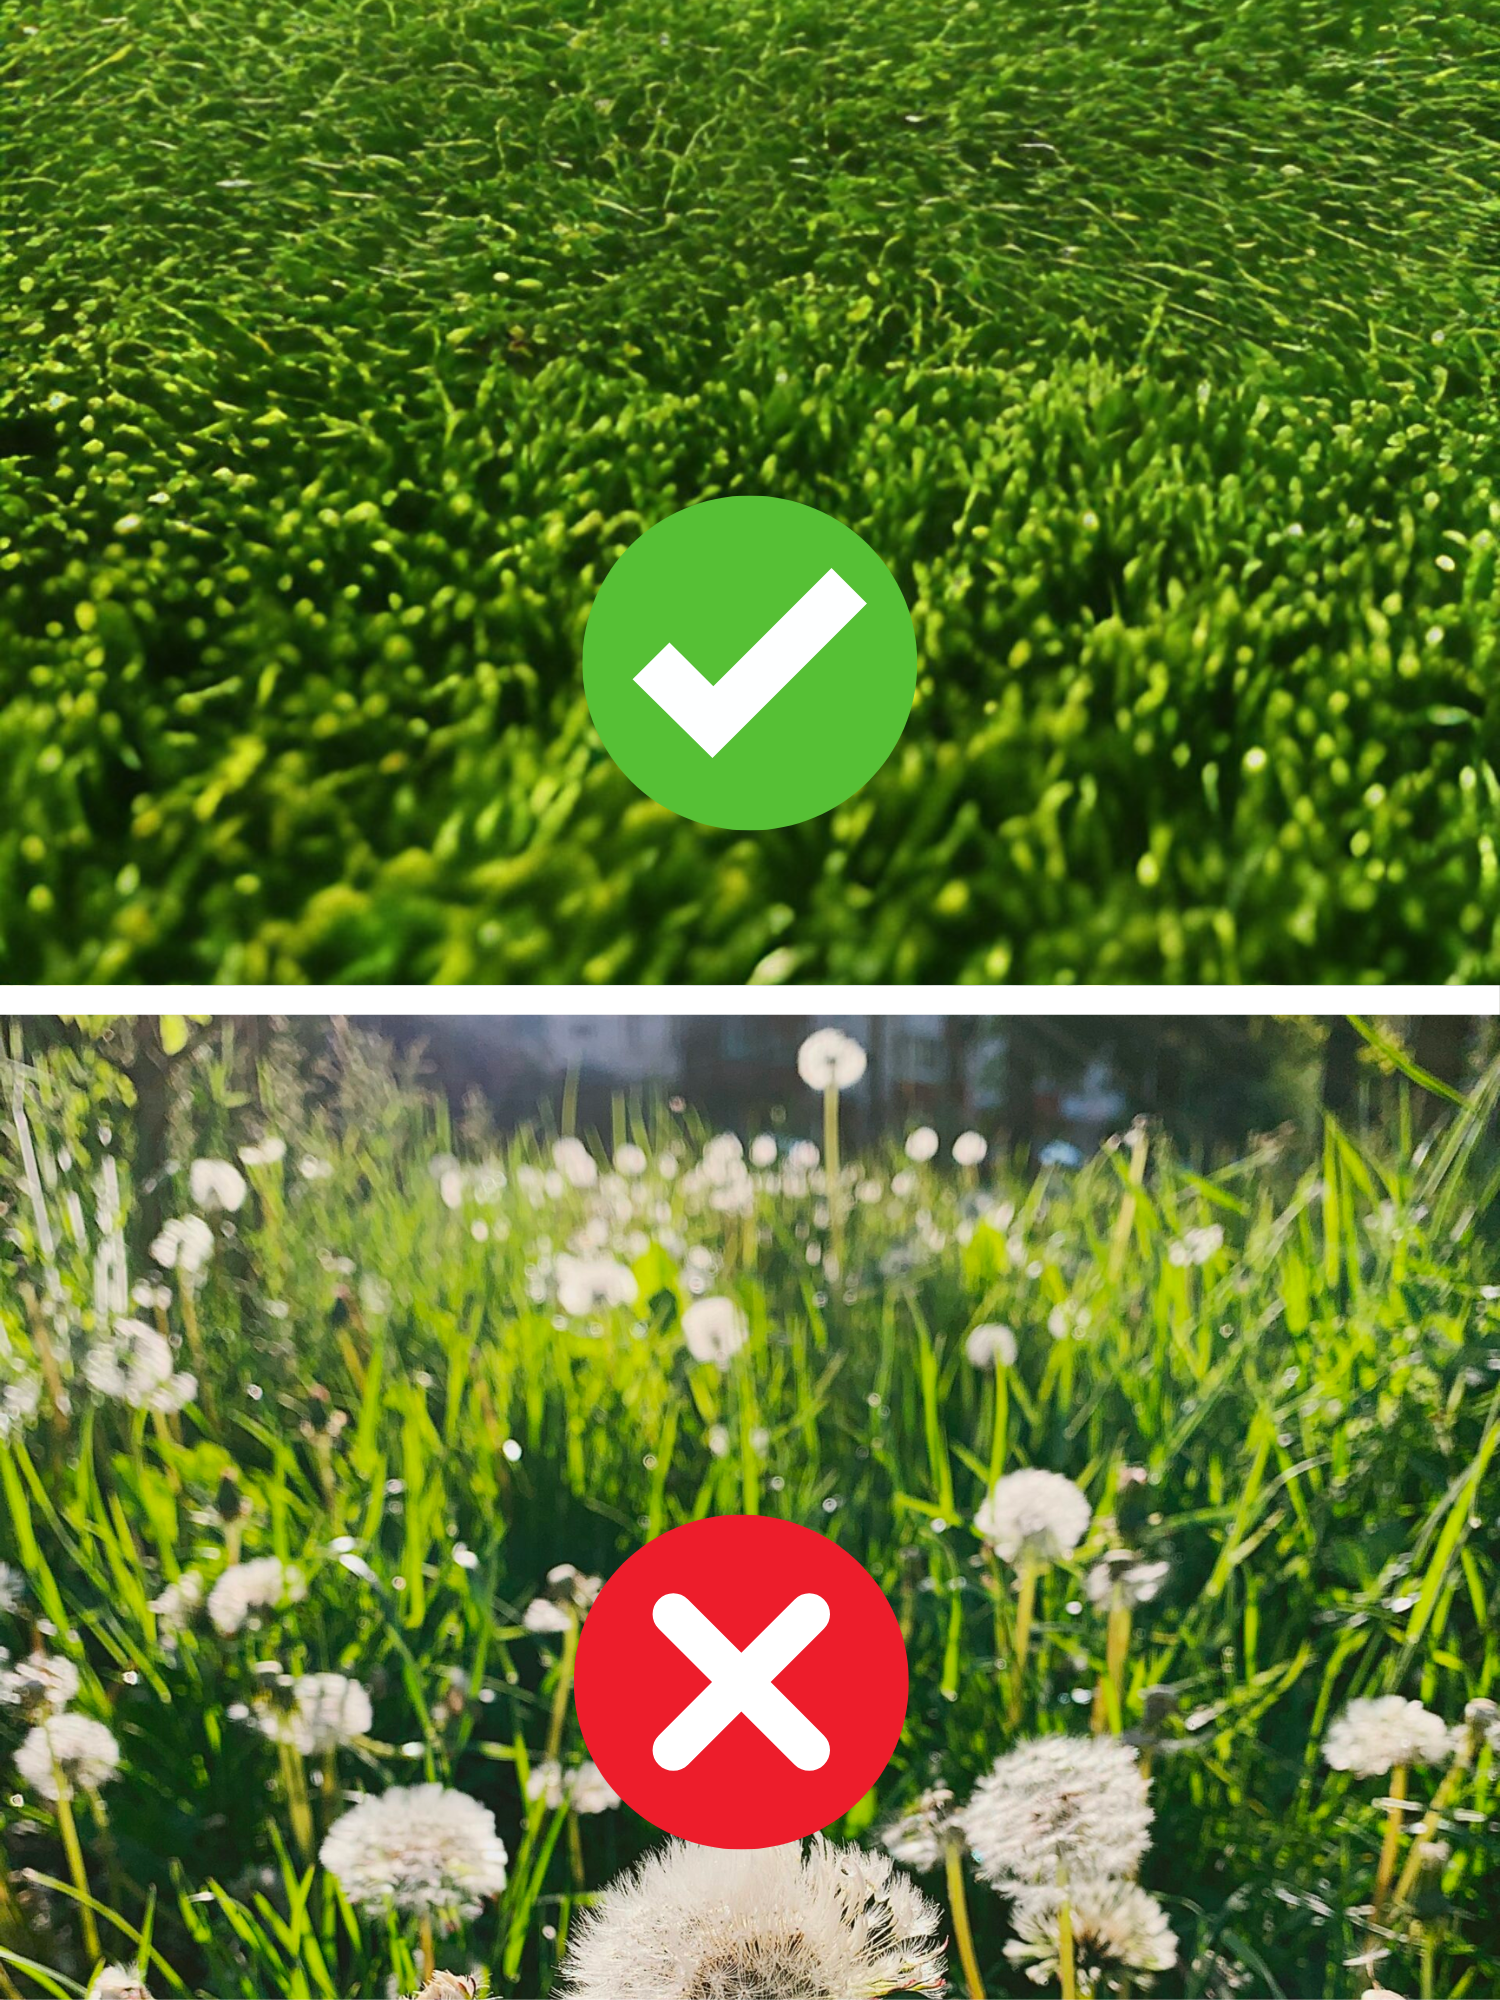 Get rid of unsightly dandelions and enjoy your lawn this summer with Turf 10.